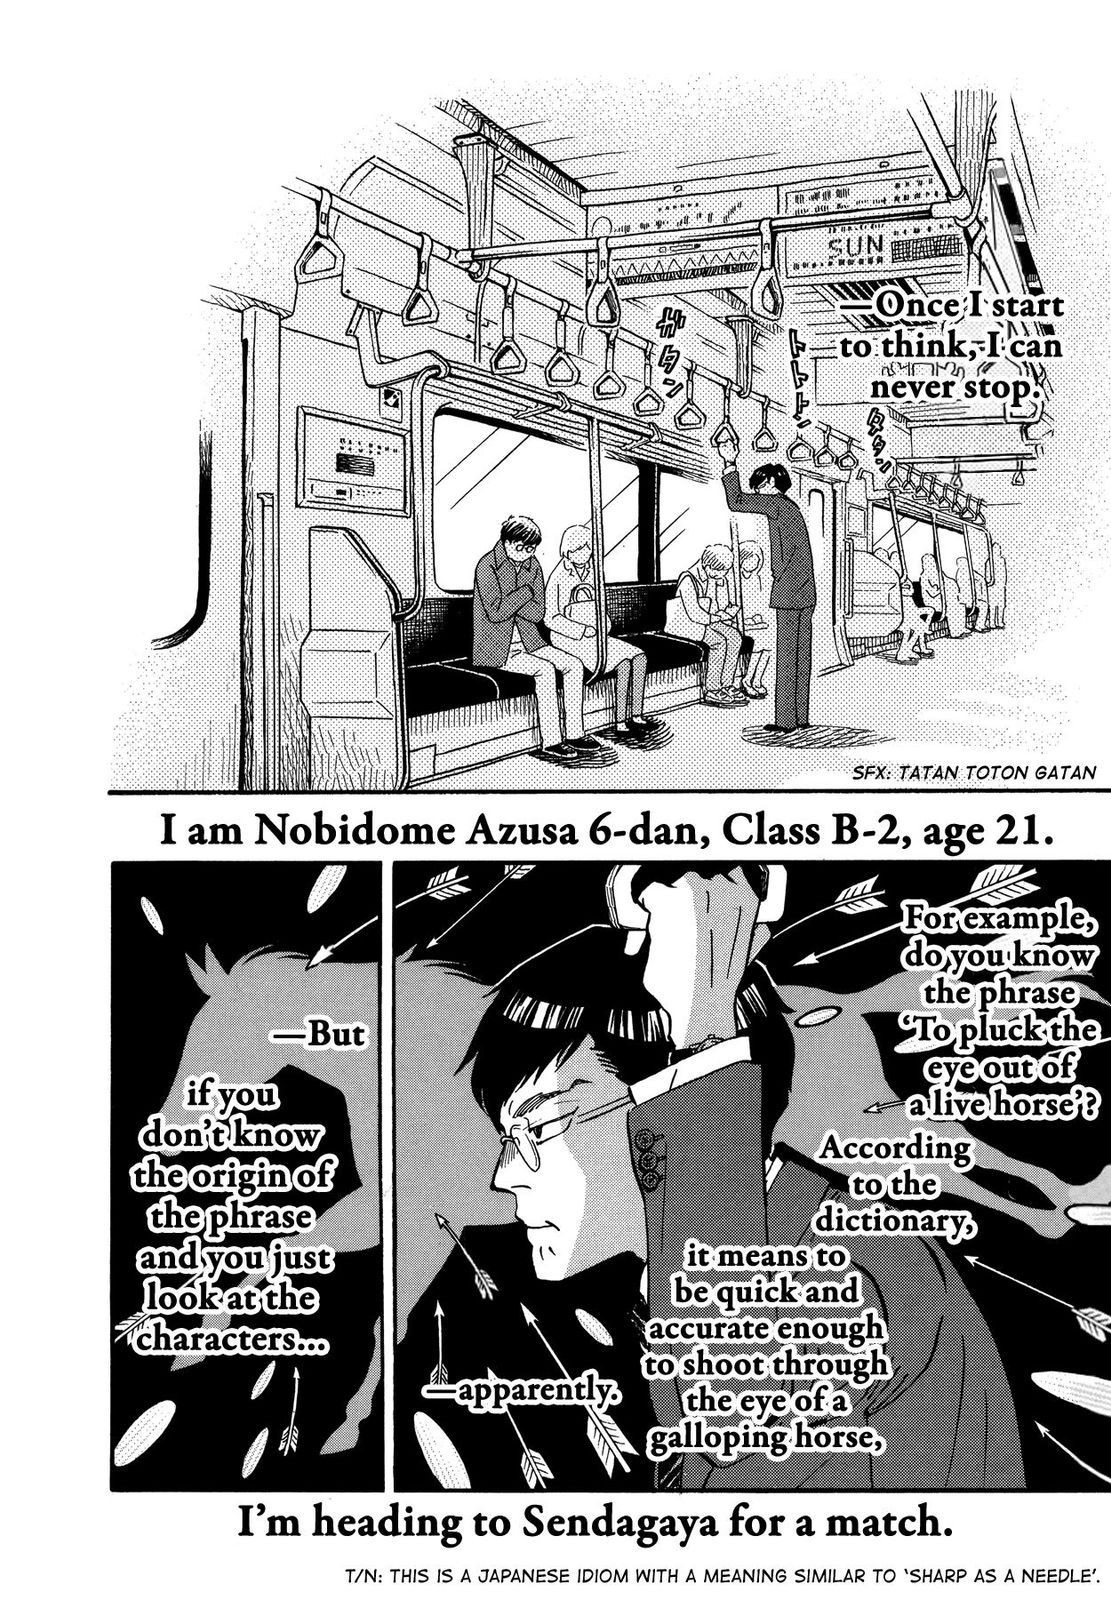 March Comes in Like a Lion, Chapter 156 Azusa Number 1 (Part 1) (EN) image 02